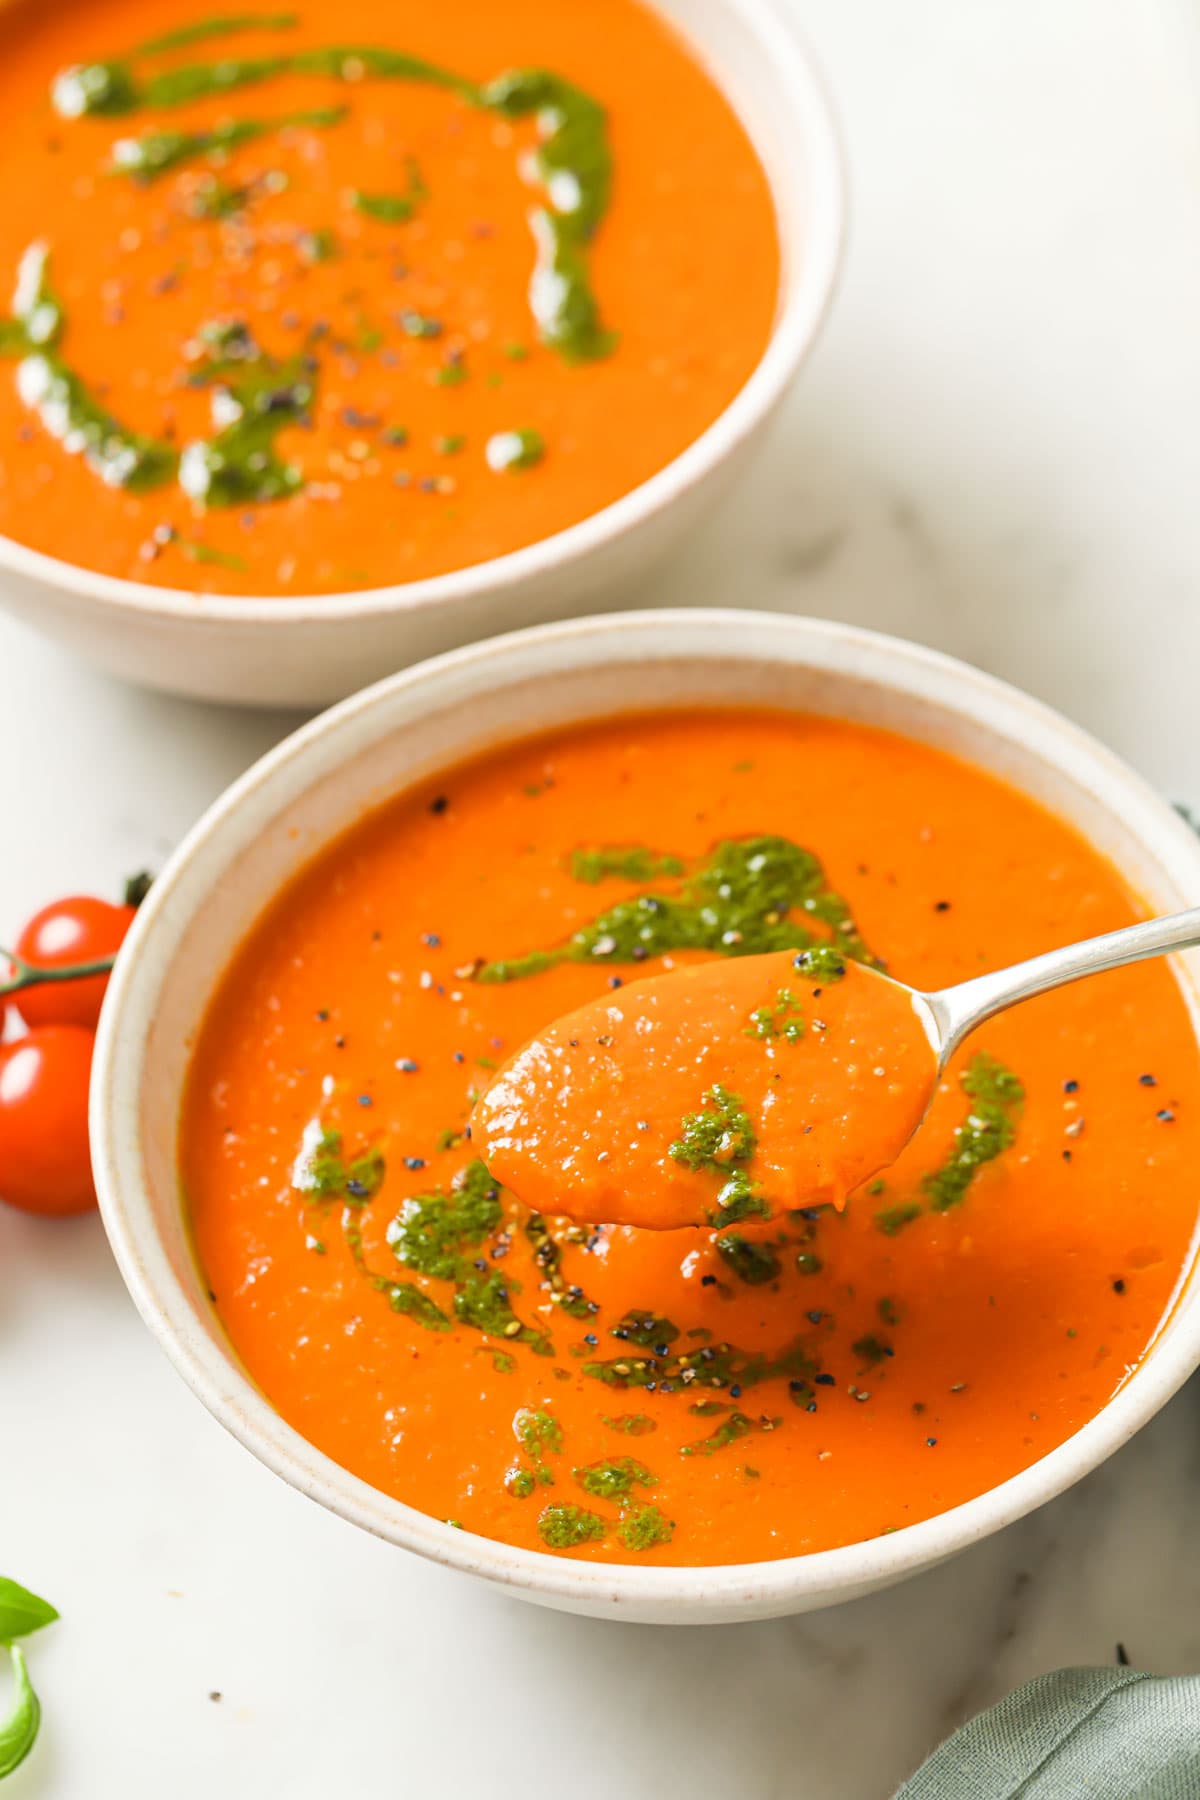 Two bowls filled with tomato soup and a spoon full of soup.